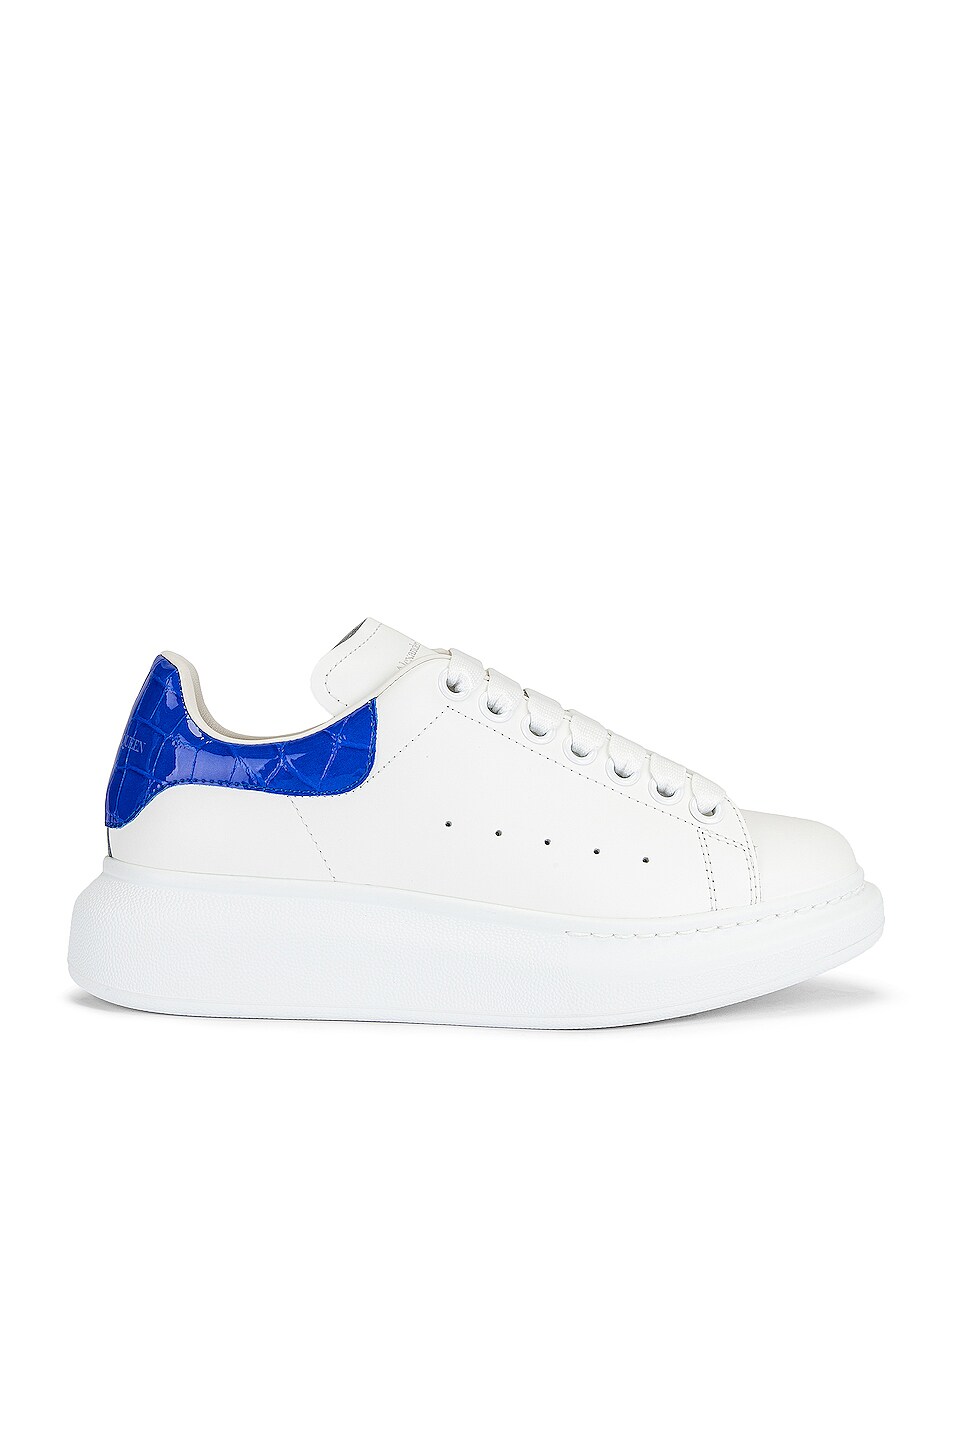 Image 1 of Alexander McQueen Lace Up Sneakers in White & Ultramarine